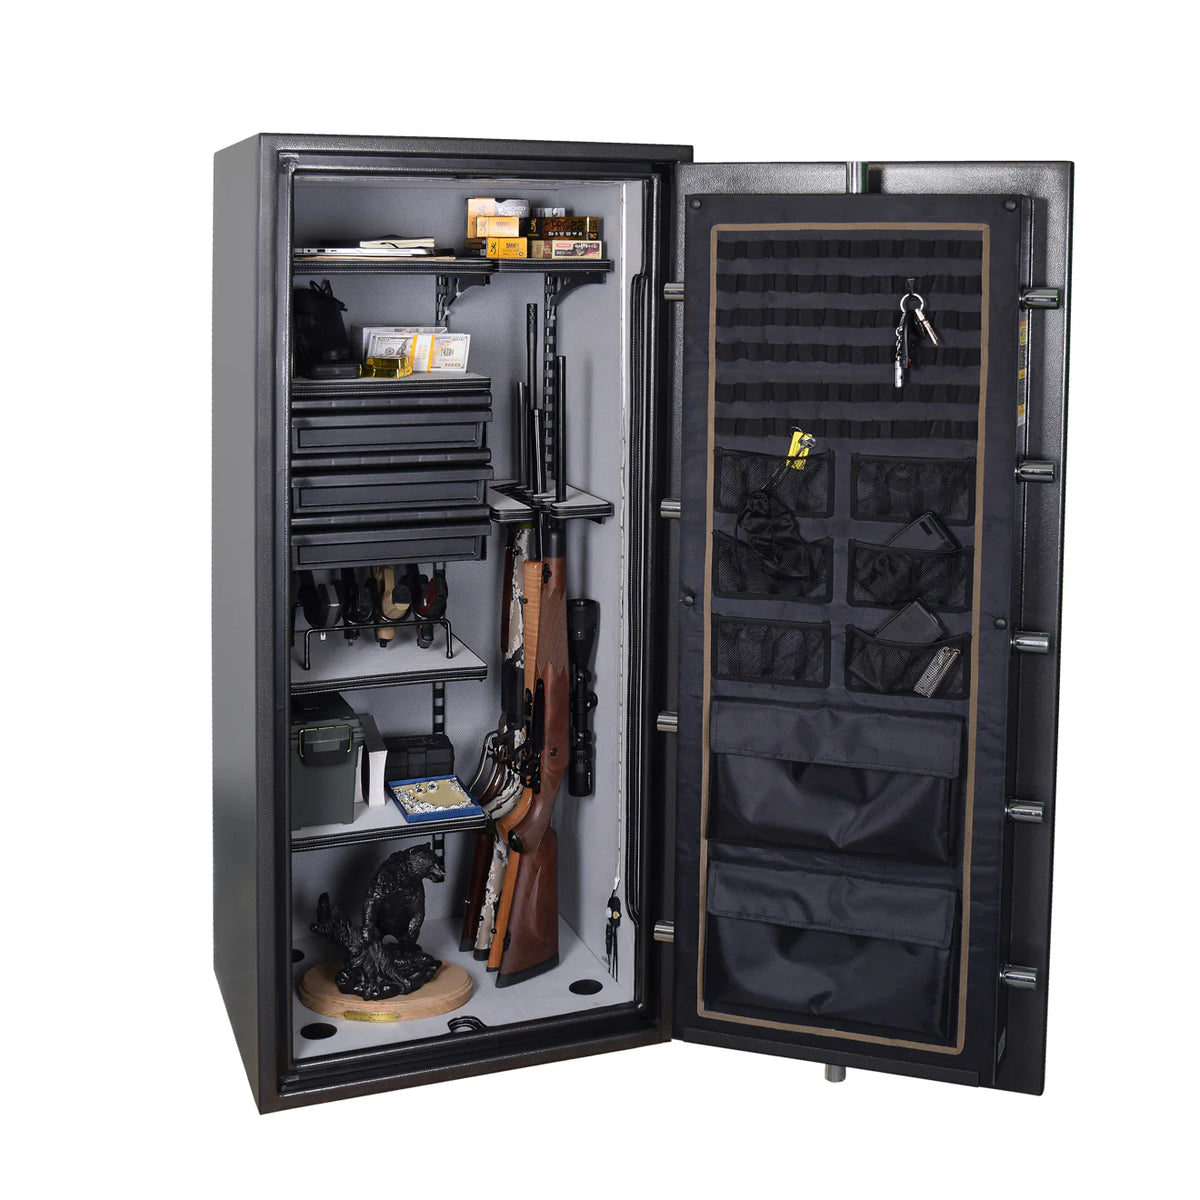 Browning Large Home Safe Deluxe Fireproof PSD19 Door Open